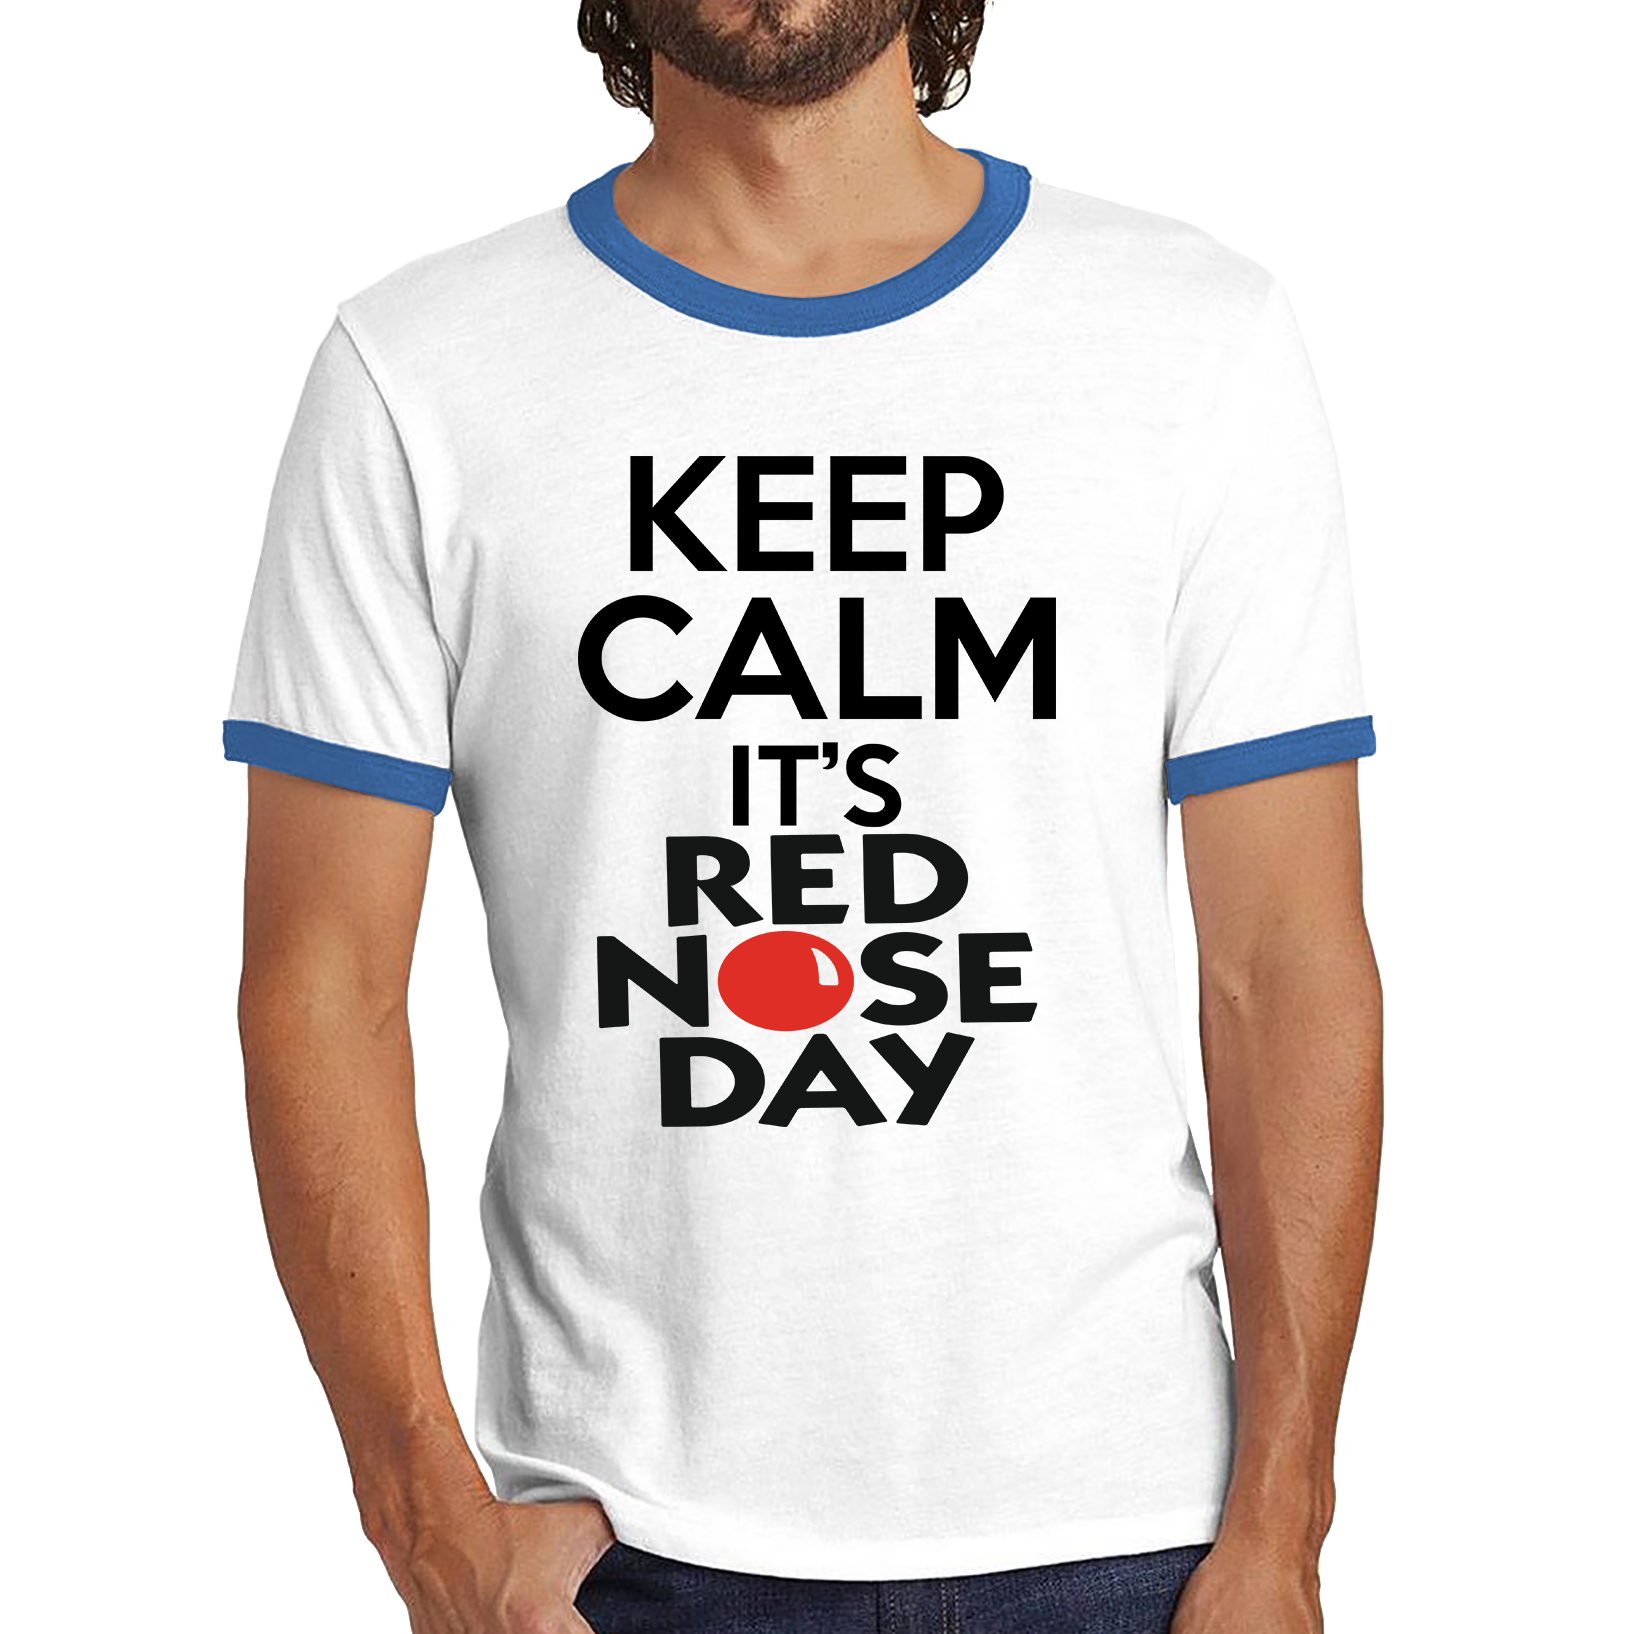 Keep Calm It's Red Nose Day Ringer T Shirt. 50% Goes To Charity